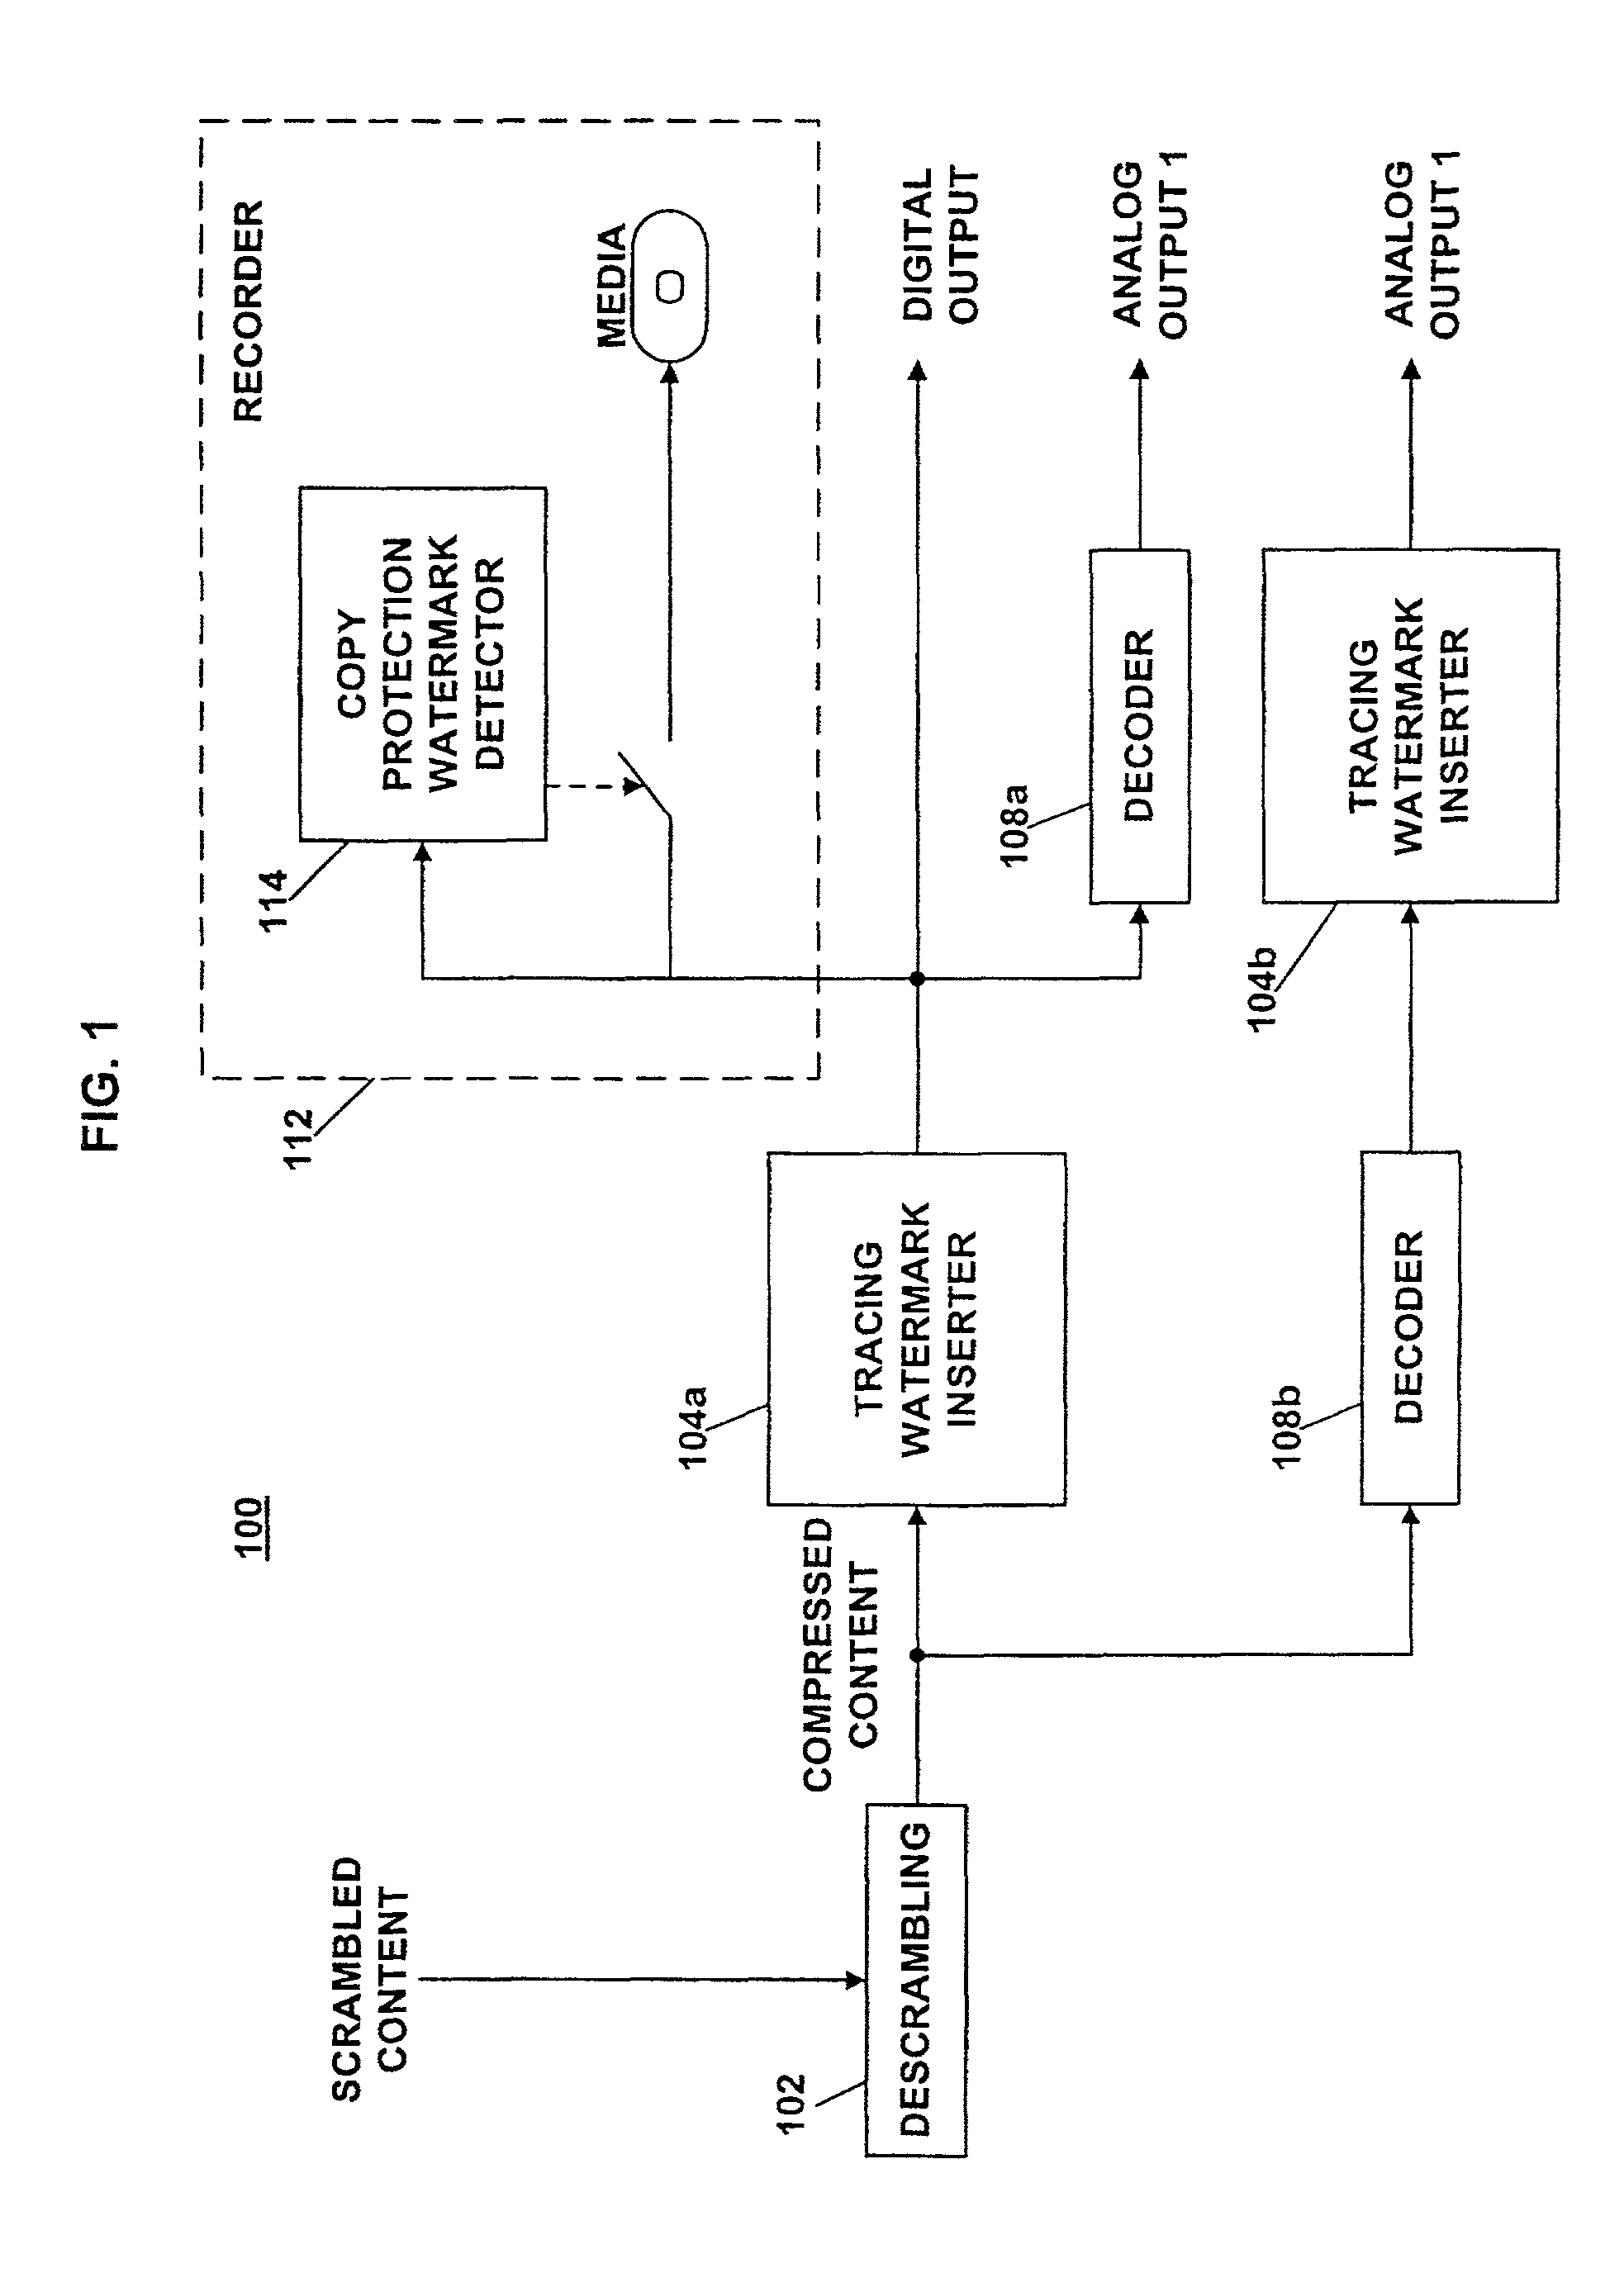 Watermarking system and methodology for digital multimedia content